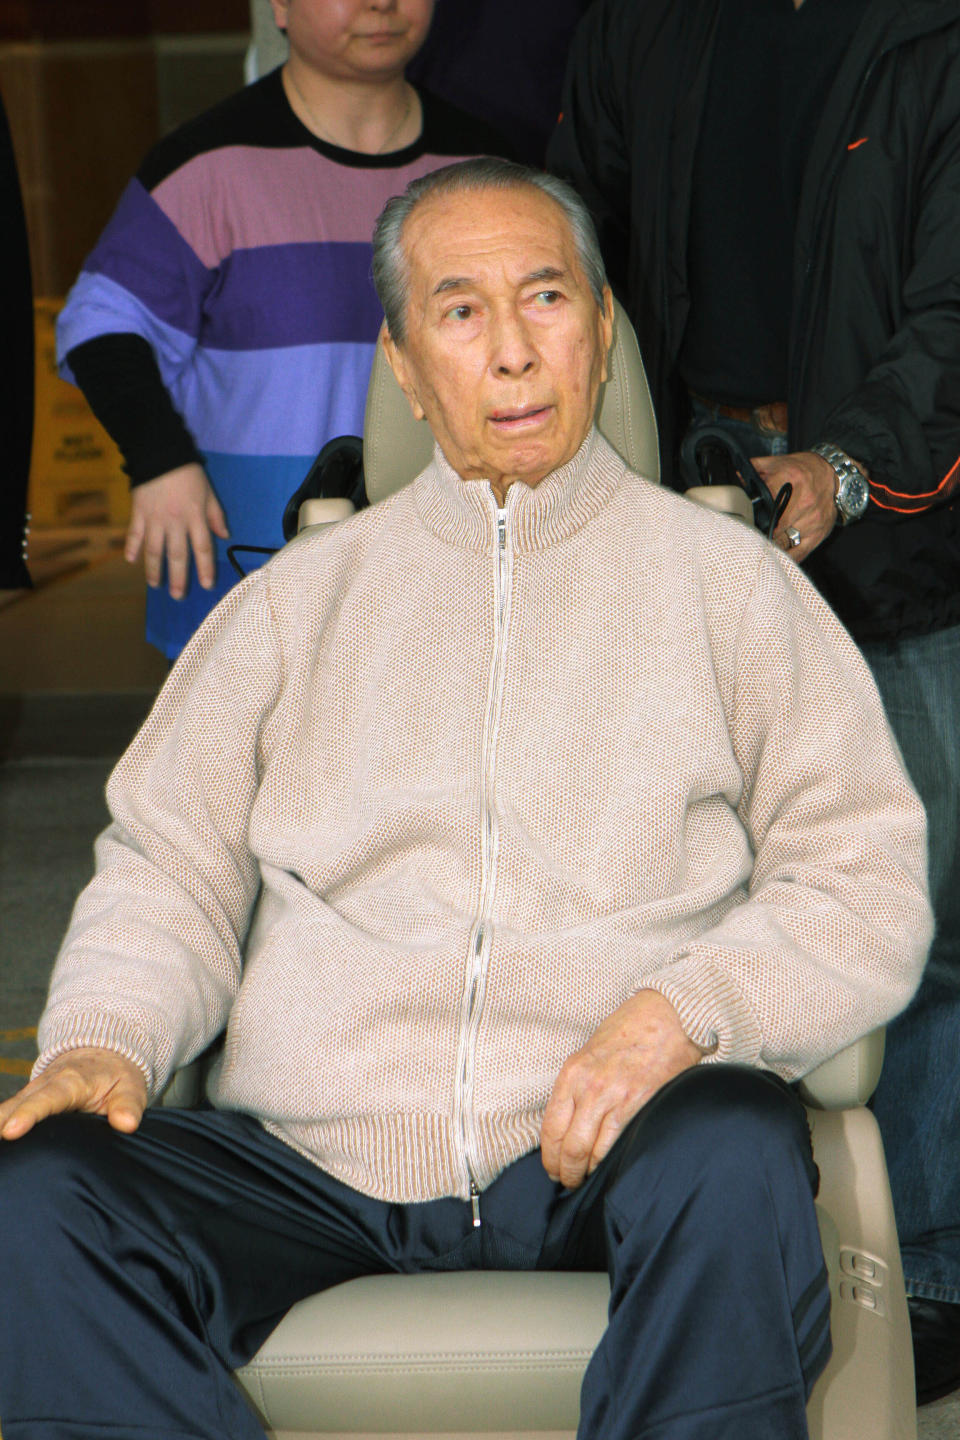 In this March 6, 2010, file photo, casino mogul Stanley Ho, wearing casual clothes and sneakers, is wheeled out of a Hong Kong hospital. On Tuesday, May 26, 2020, the family of Stanley Ho, the Macao casino tycoon considered the father of modern gambling in China, has died at 98. (AP Photo, File)